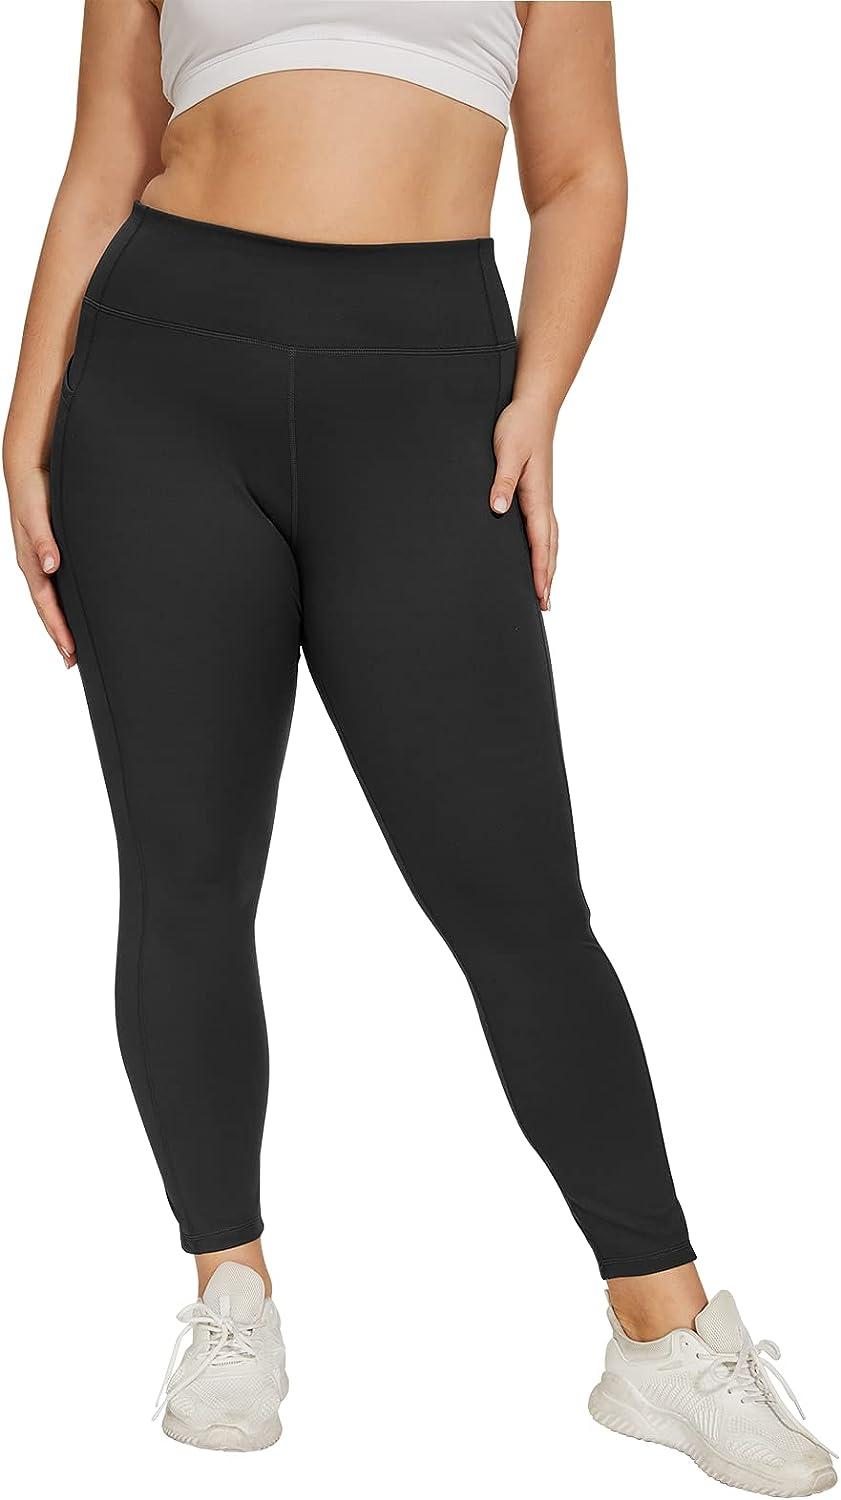 Women Buttery Soft Plus Size Leggings-Workout Pants for Women with Pocket  High Waist Naked Feeling Active Athletic Leggings